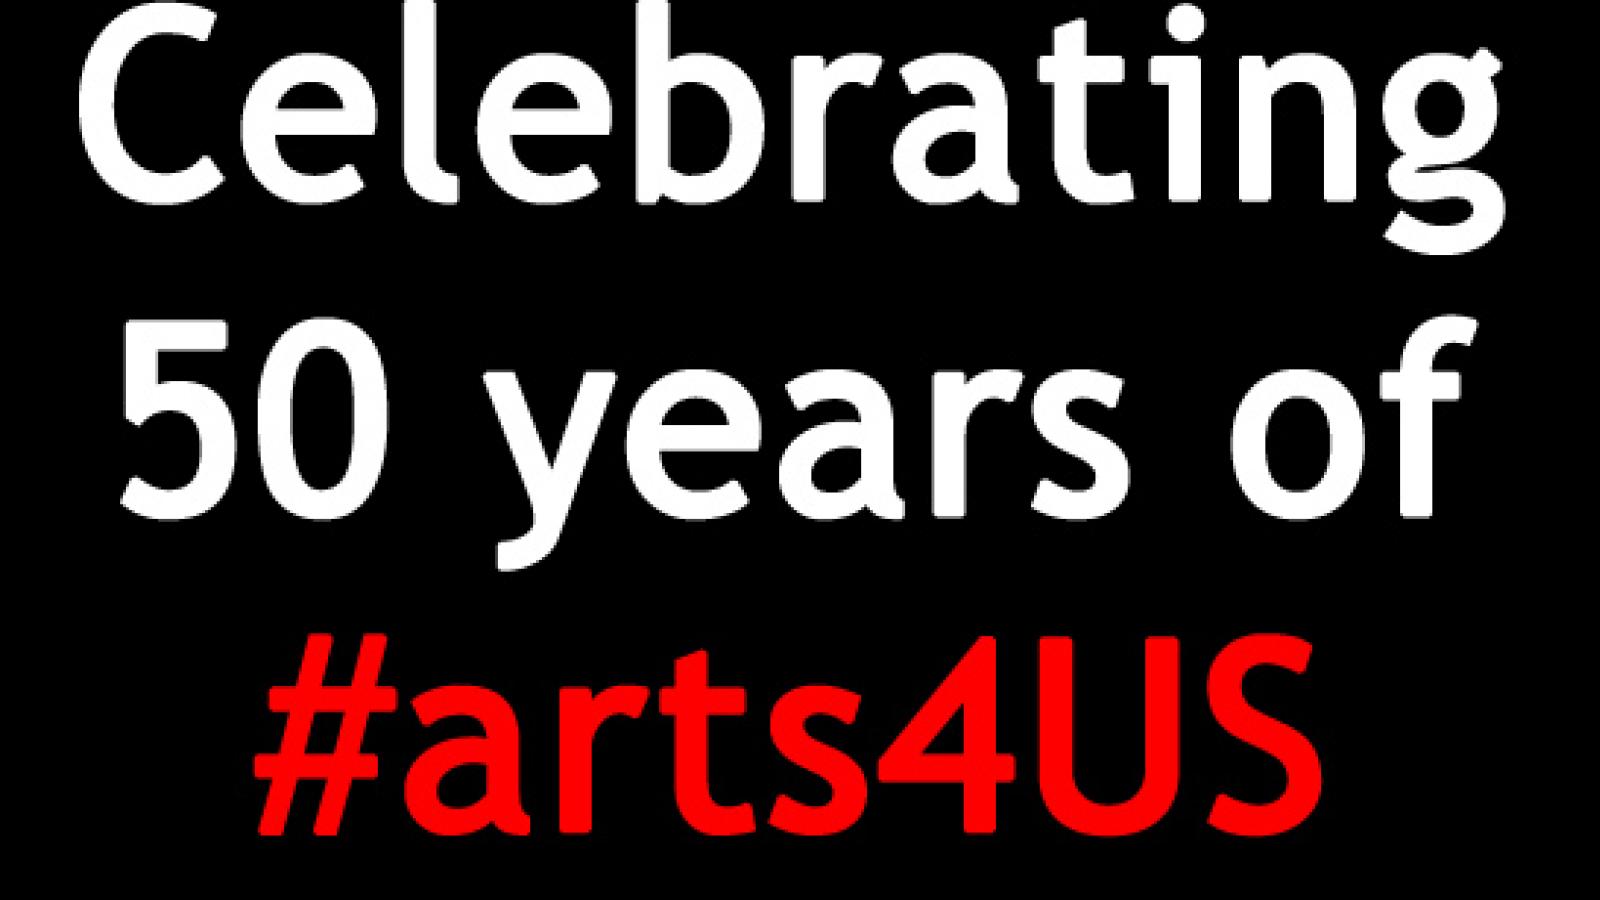 red and white text against black background that says celebrating 50 years of #arts4US